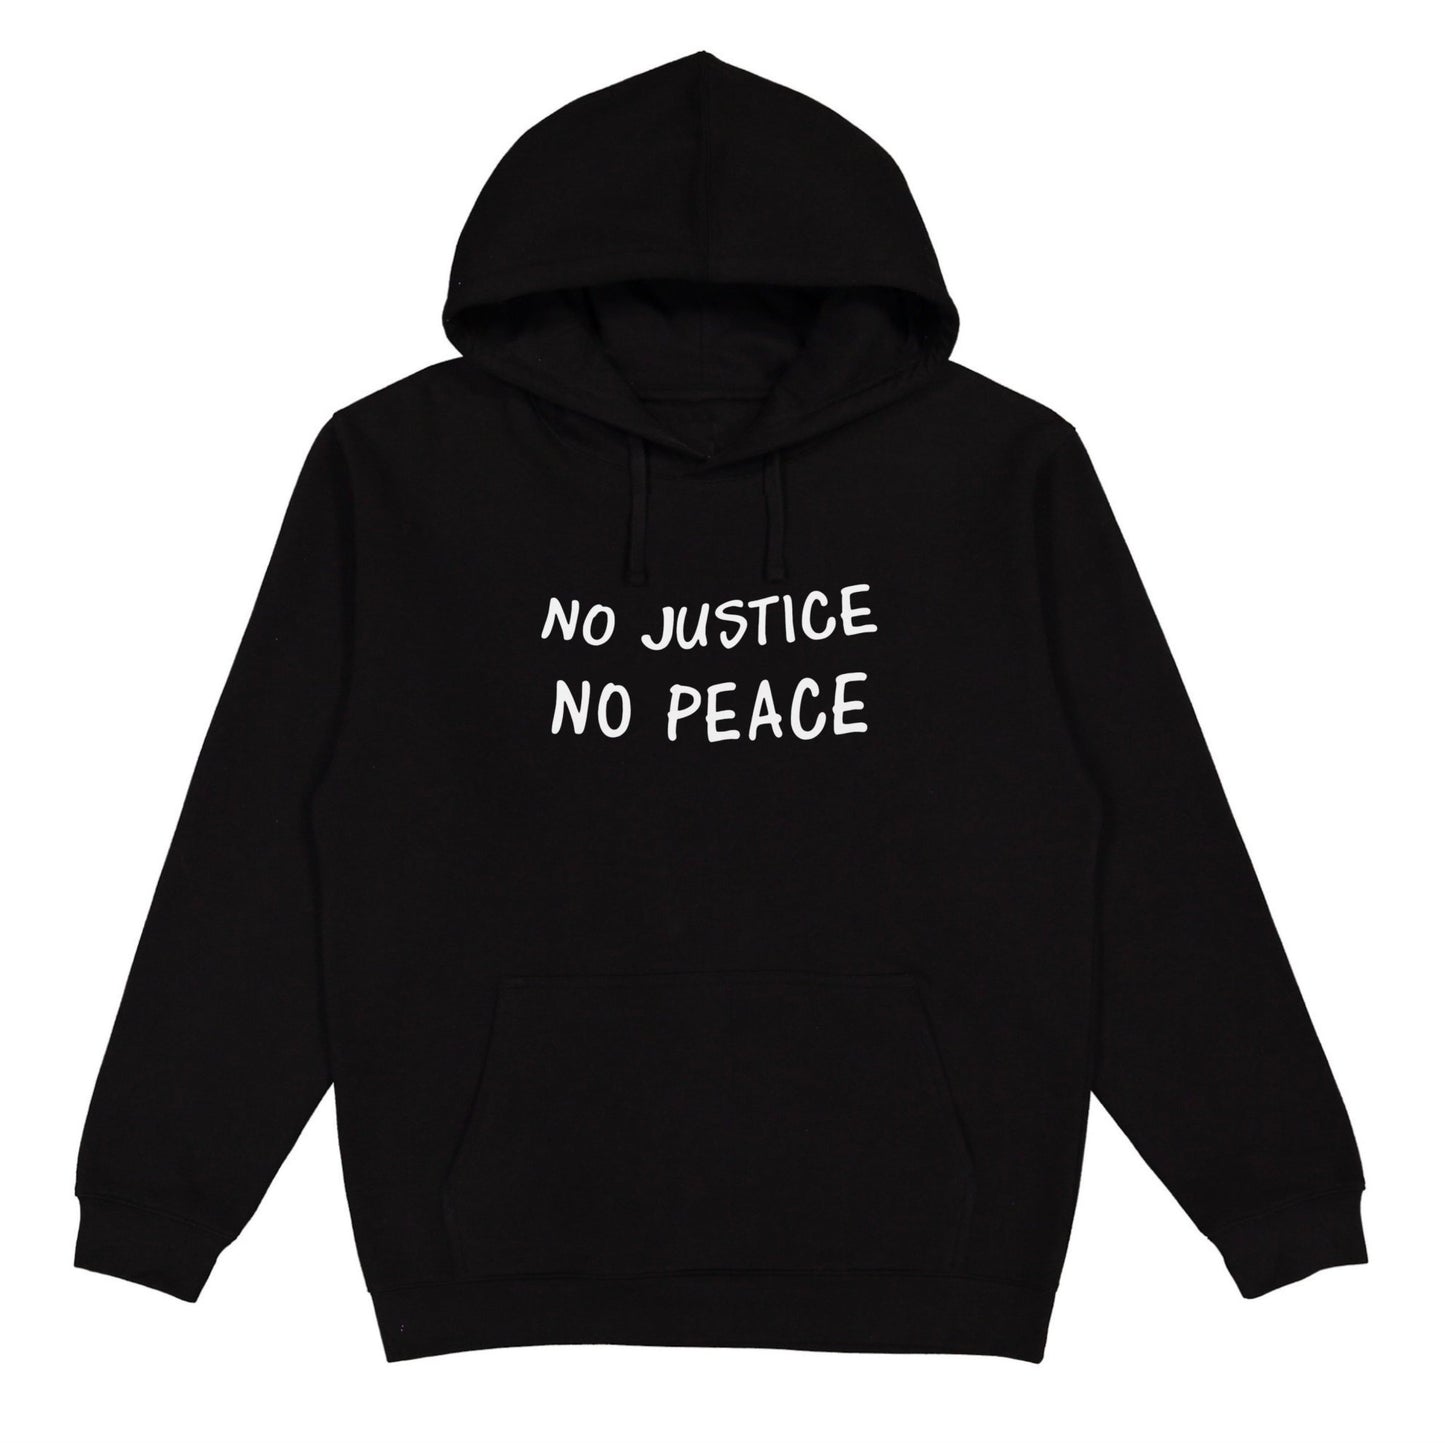 No Justice No Peace Hoodie Wear The Peace Hoodies S